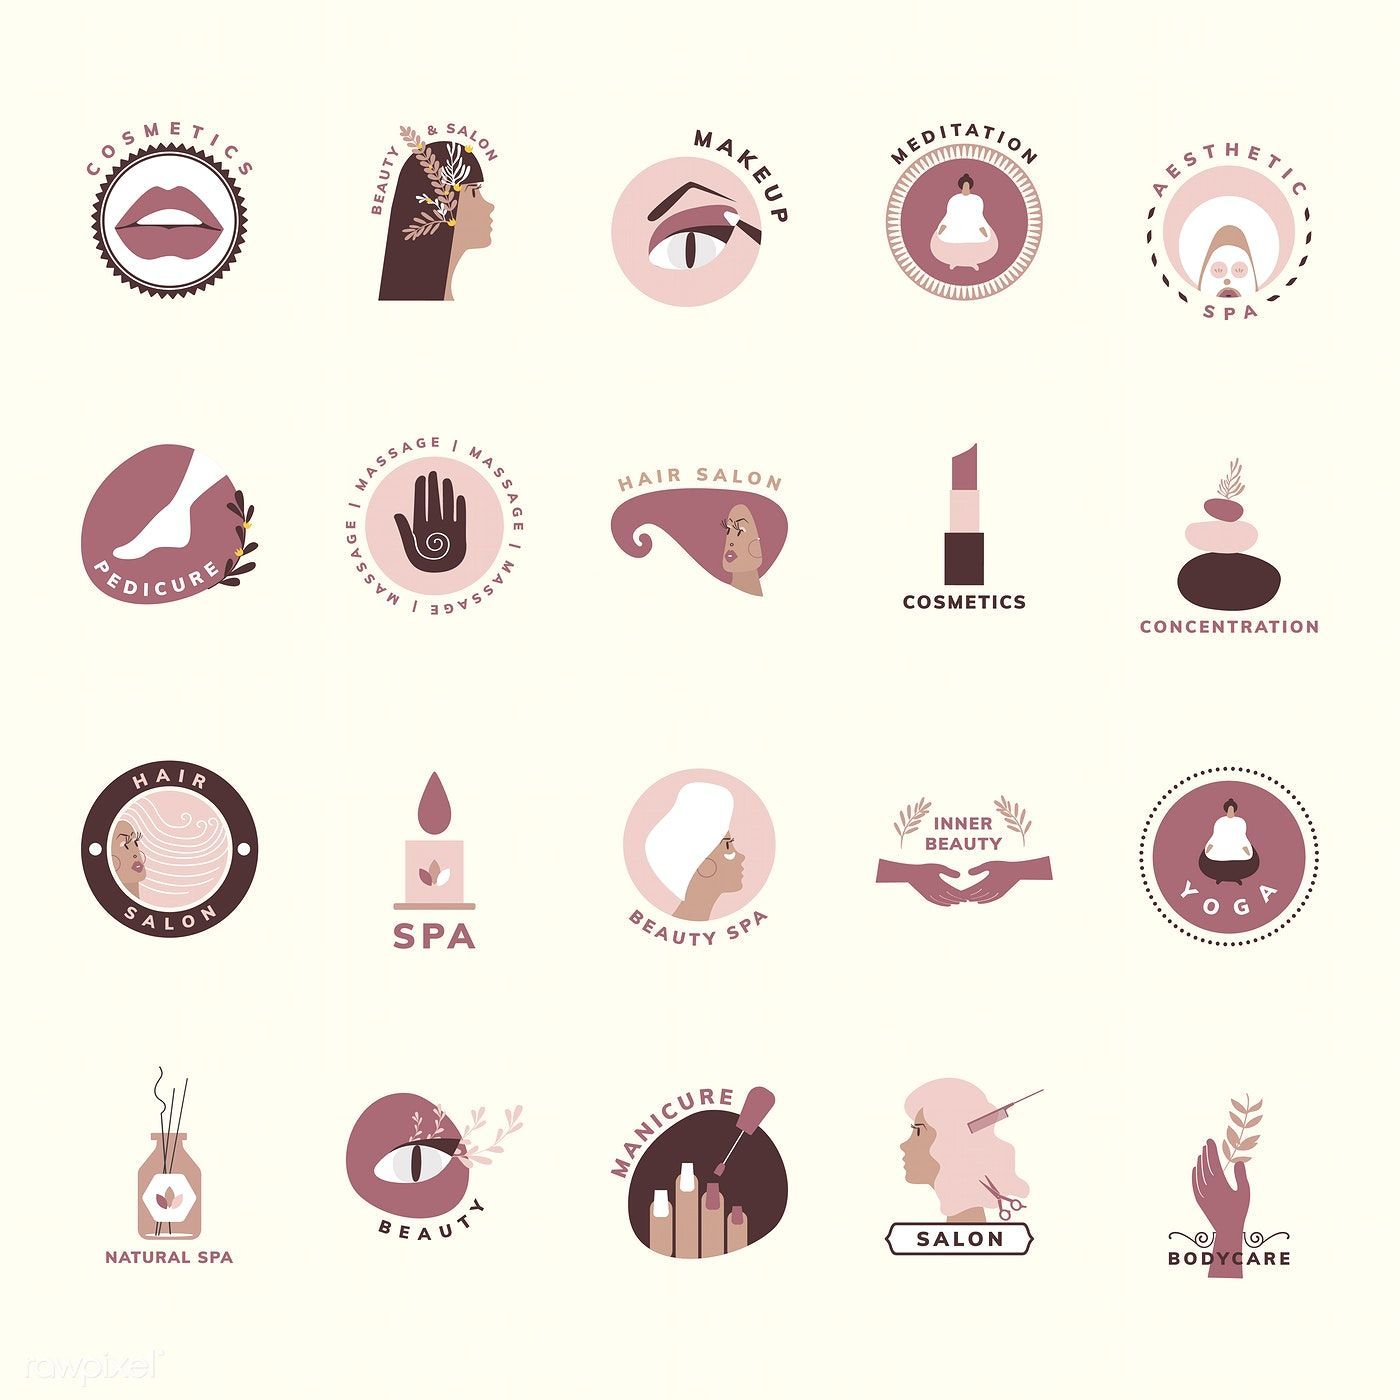 Download free vector of Set of beauty and cosmetics icons 473027 - Download free vector of Set of beauty and cosmetics icons 473027 -   13 beauty Icon free ideas